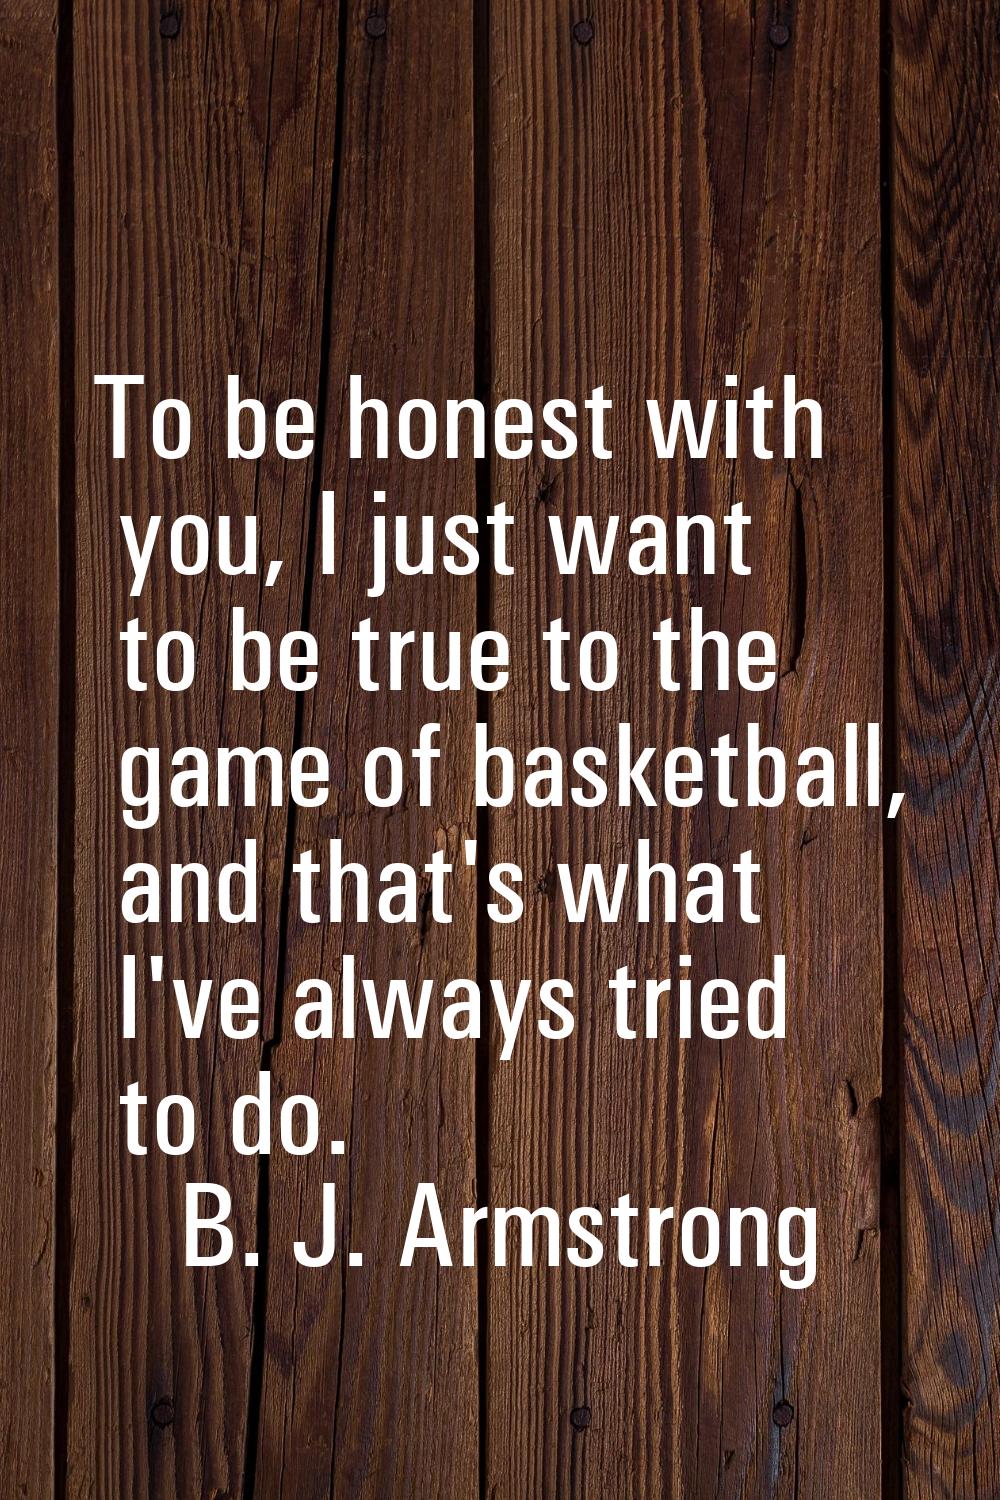 To be honest with you, I just want to be true to the game of basketball, and that's what I've alway